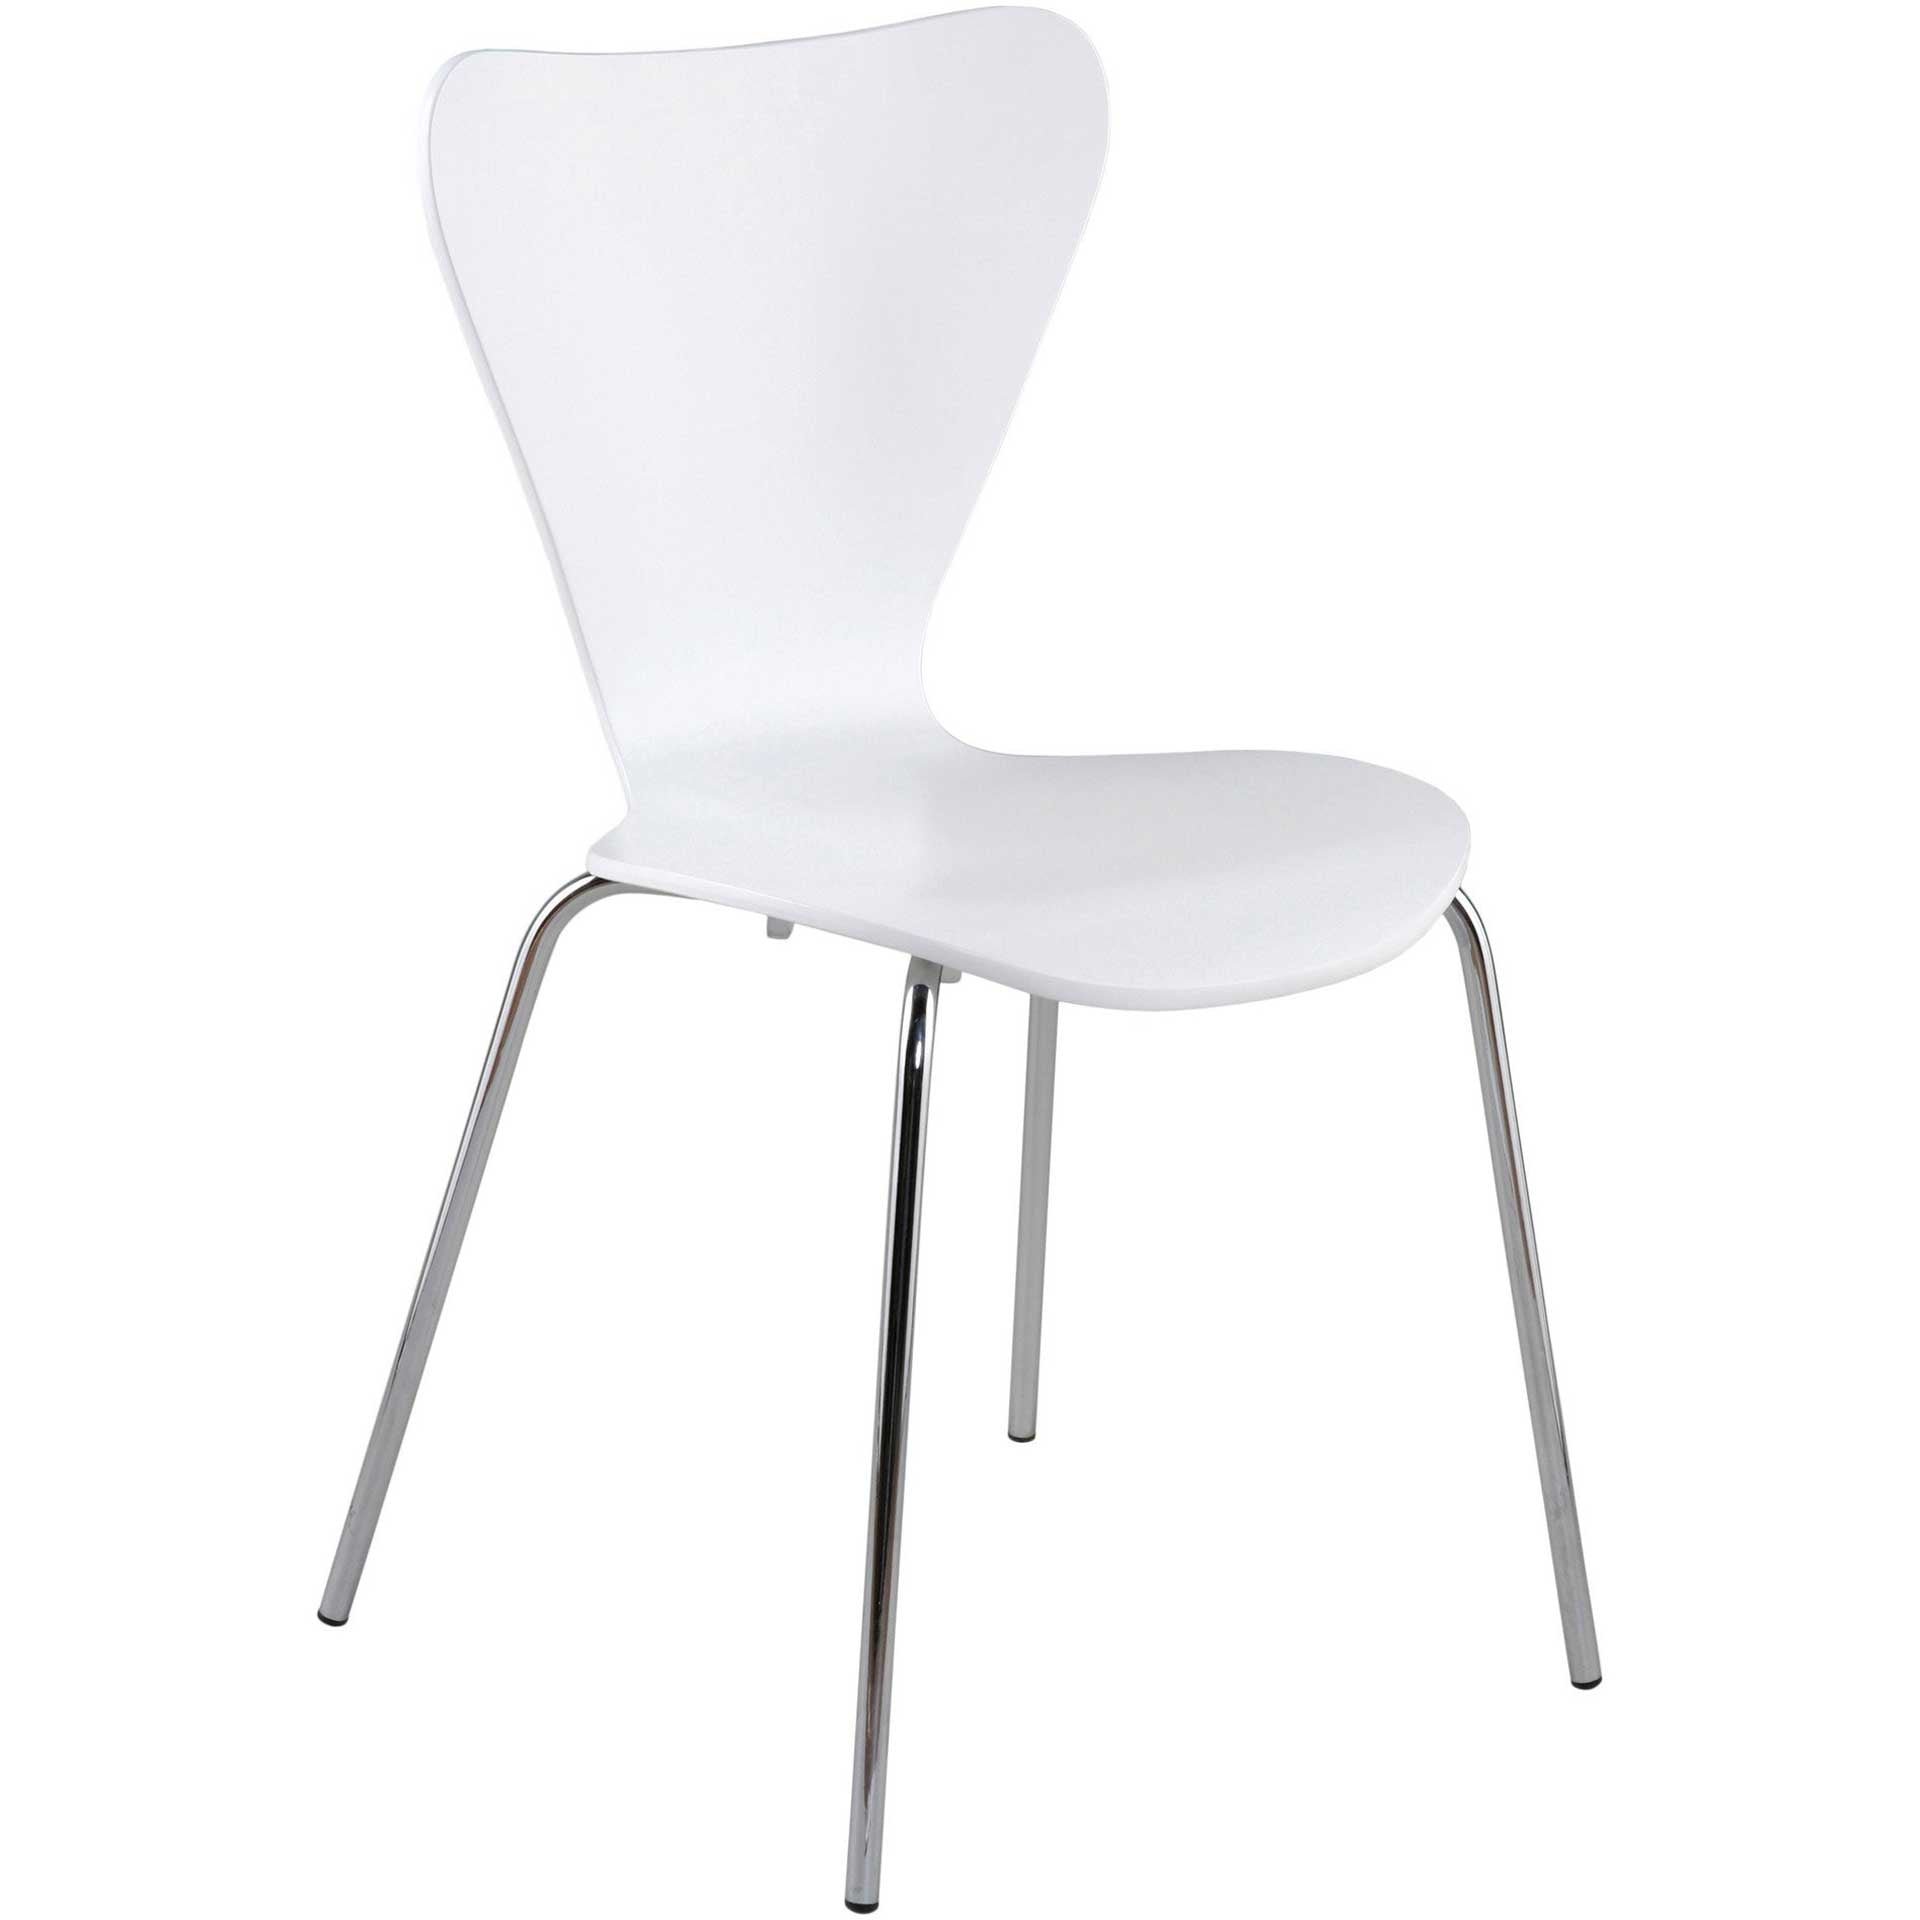 Tenney Side Chair White (Set of 4)